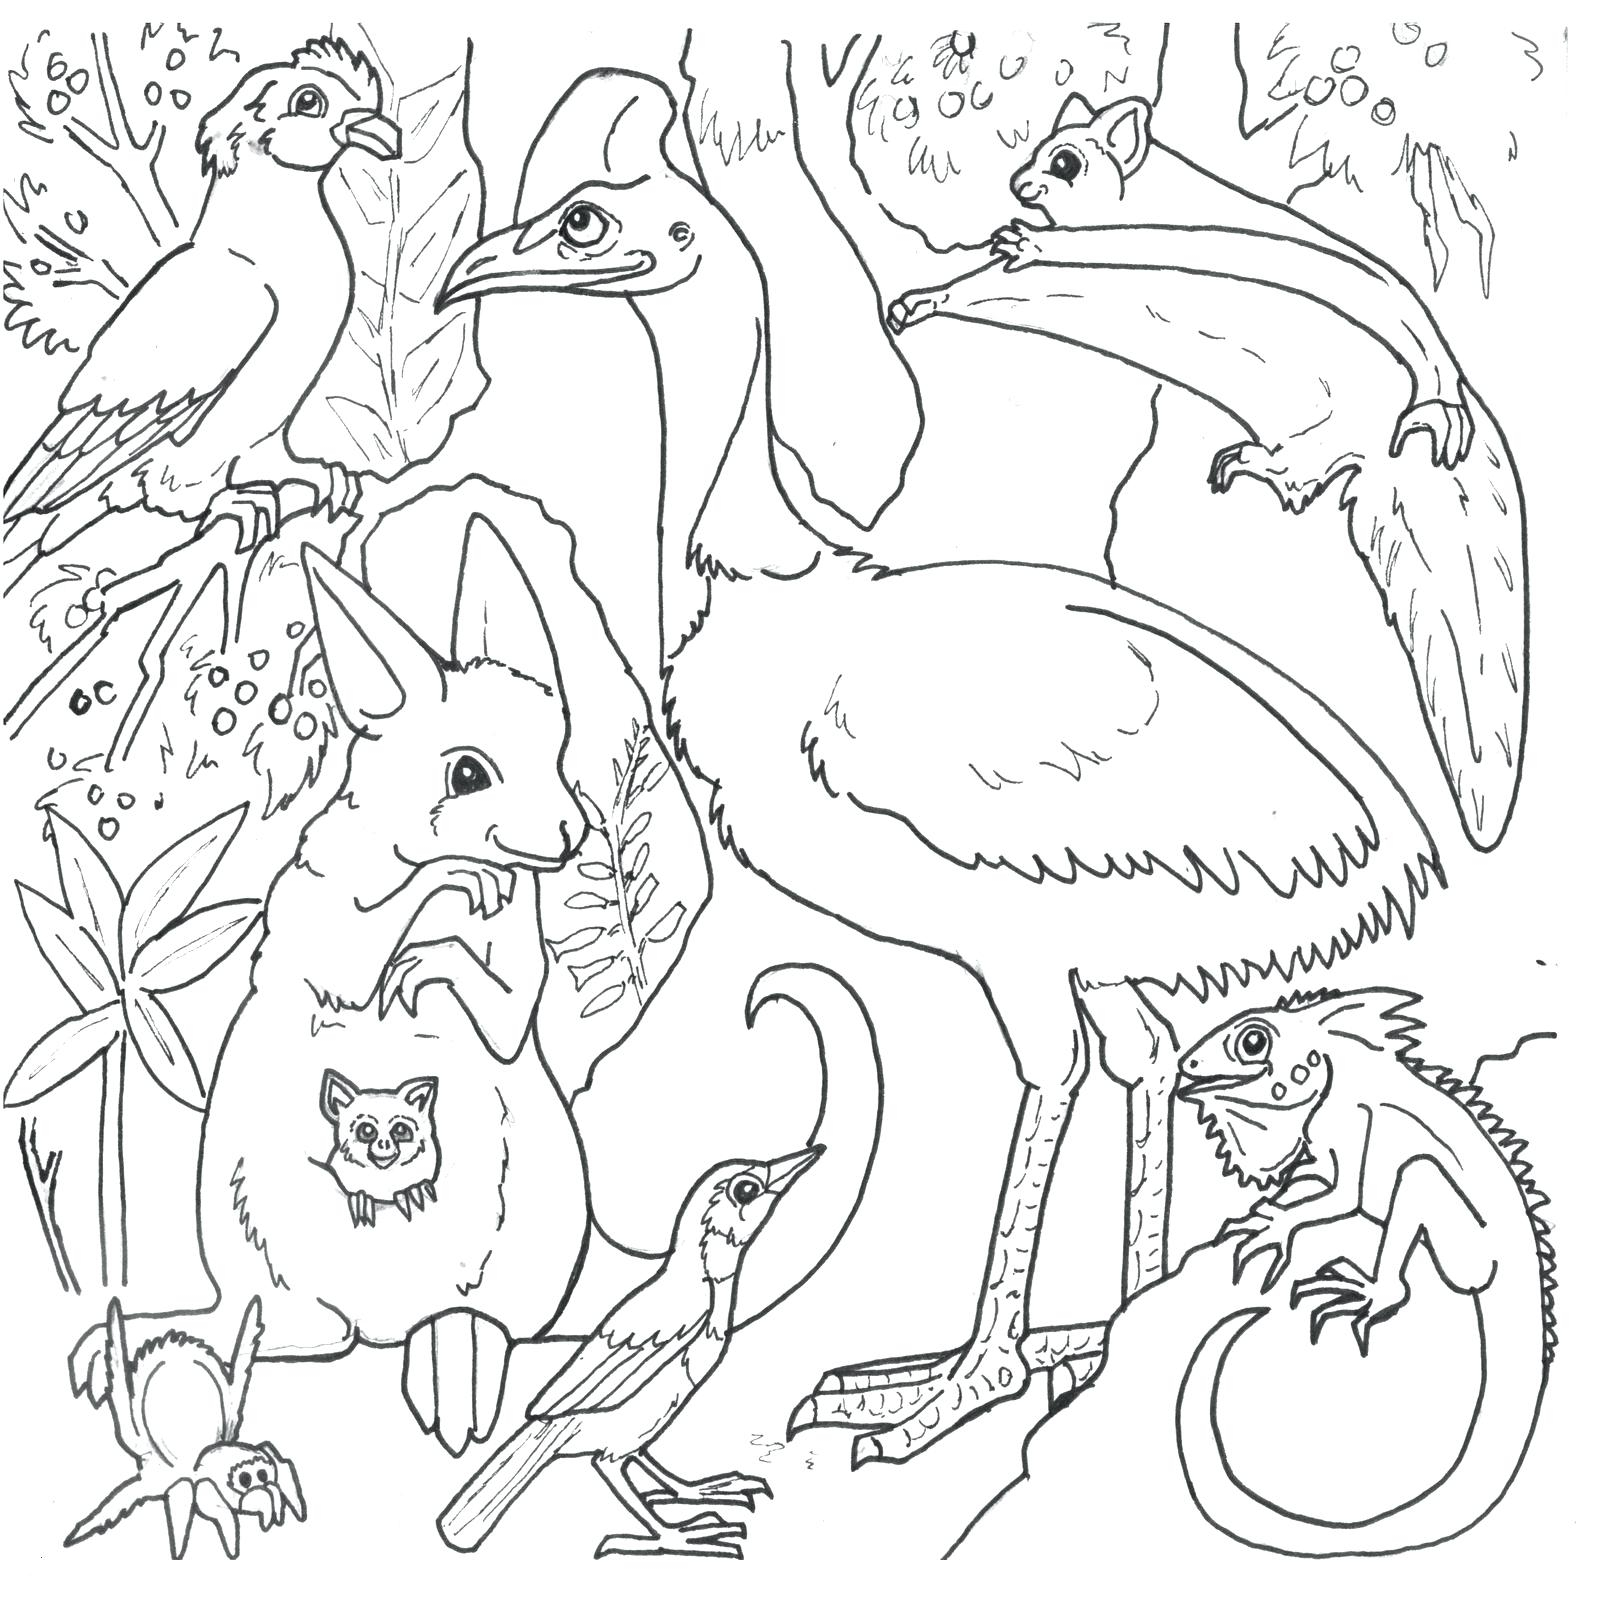 Animals In The Rainforest Coloring Pages Rainforest Animals Colouring Pages Coloring Page 6 Amazon Rainforest